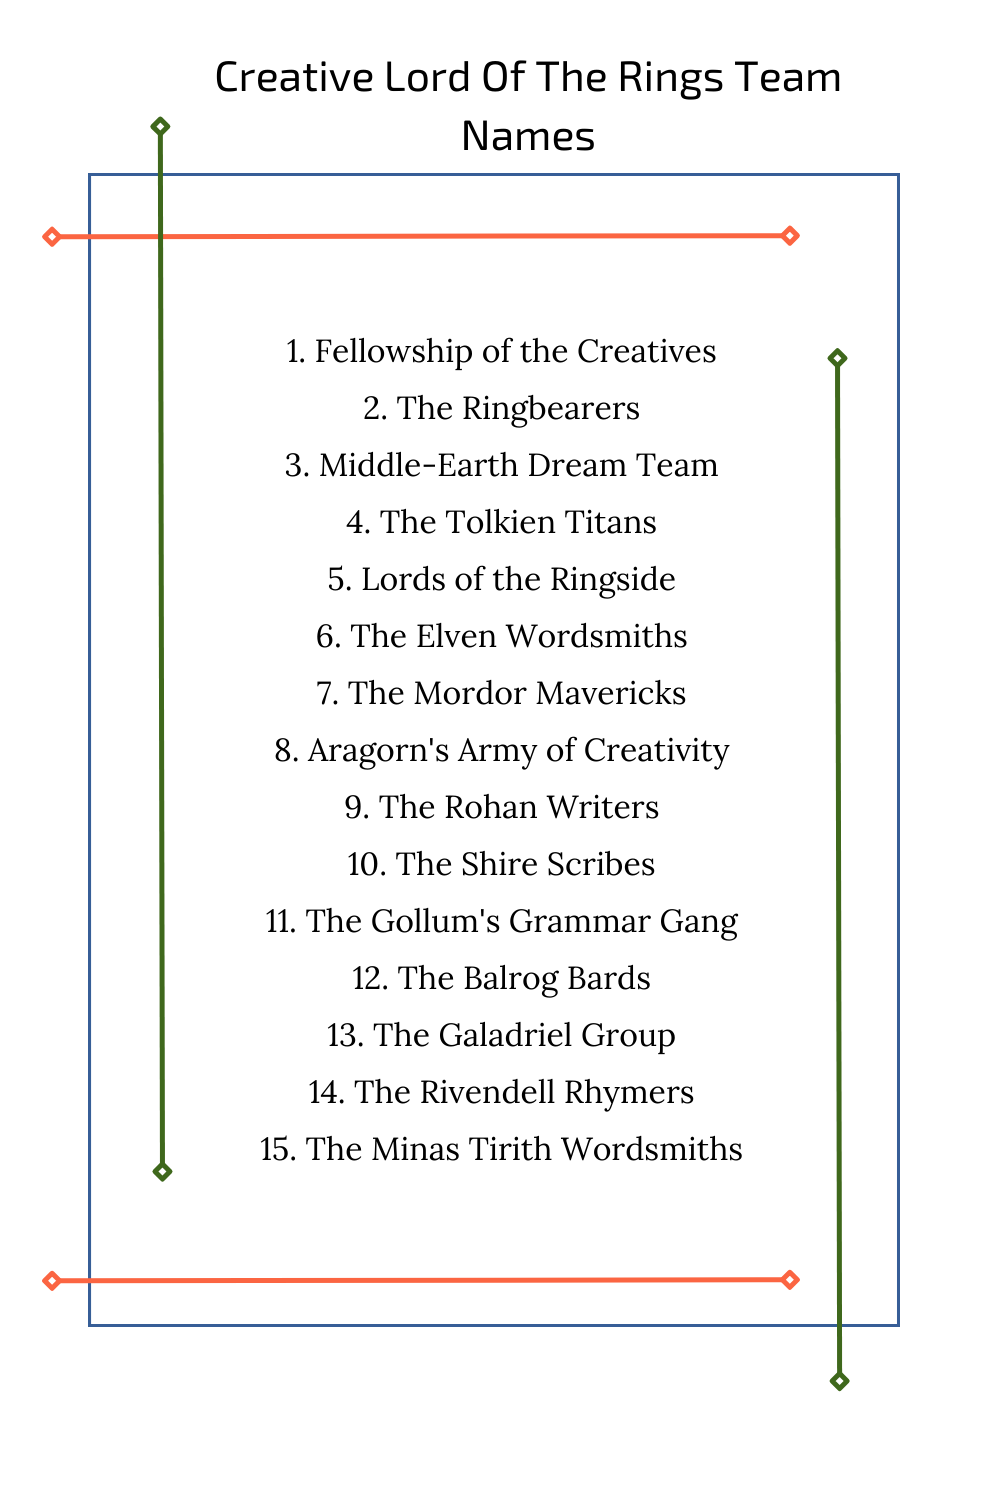 Creative Lord Of The Rings Team Names